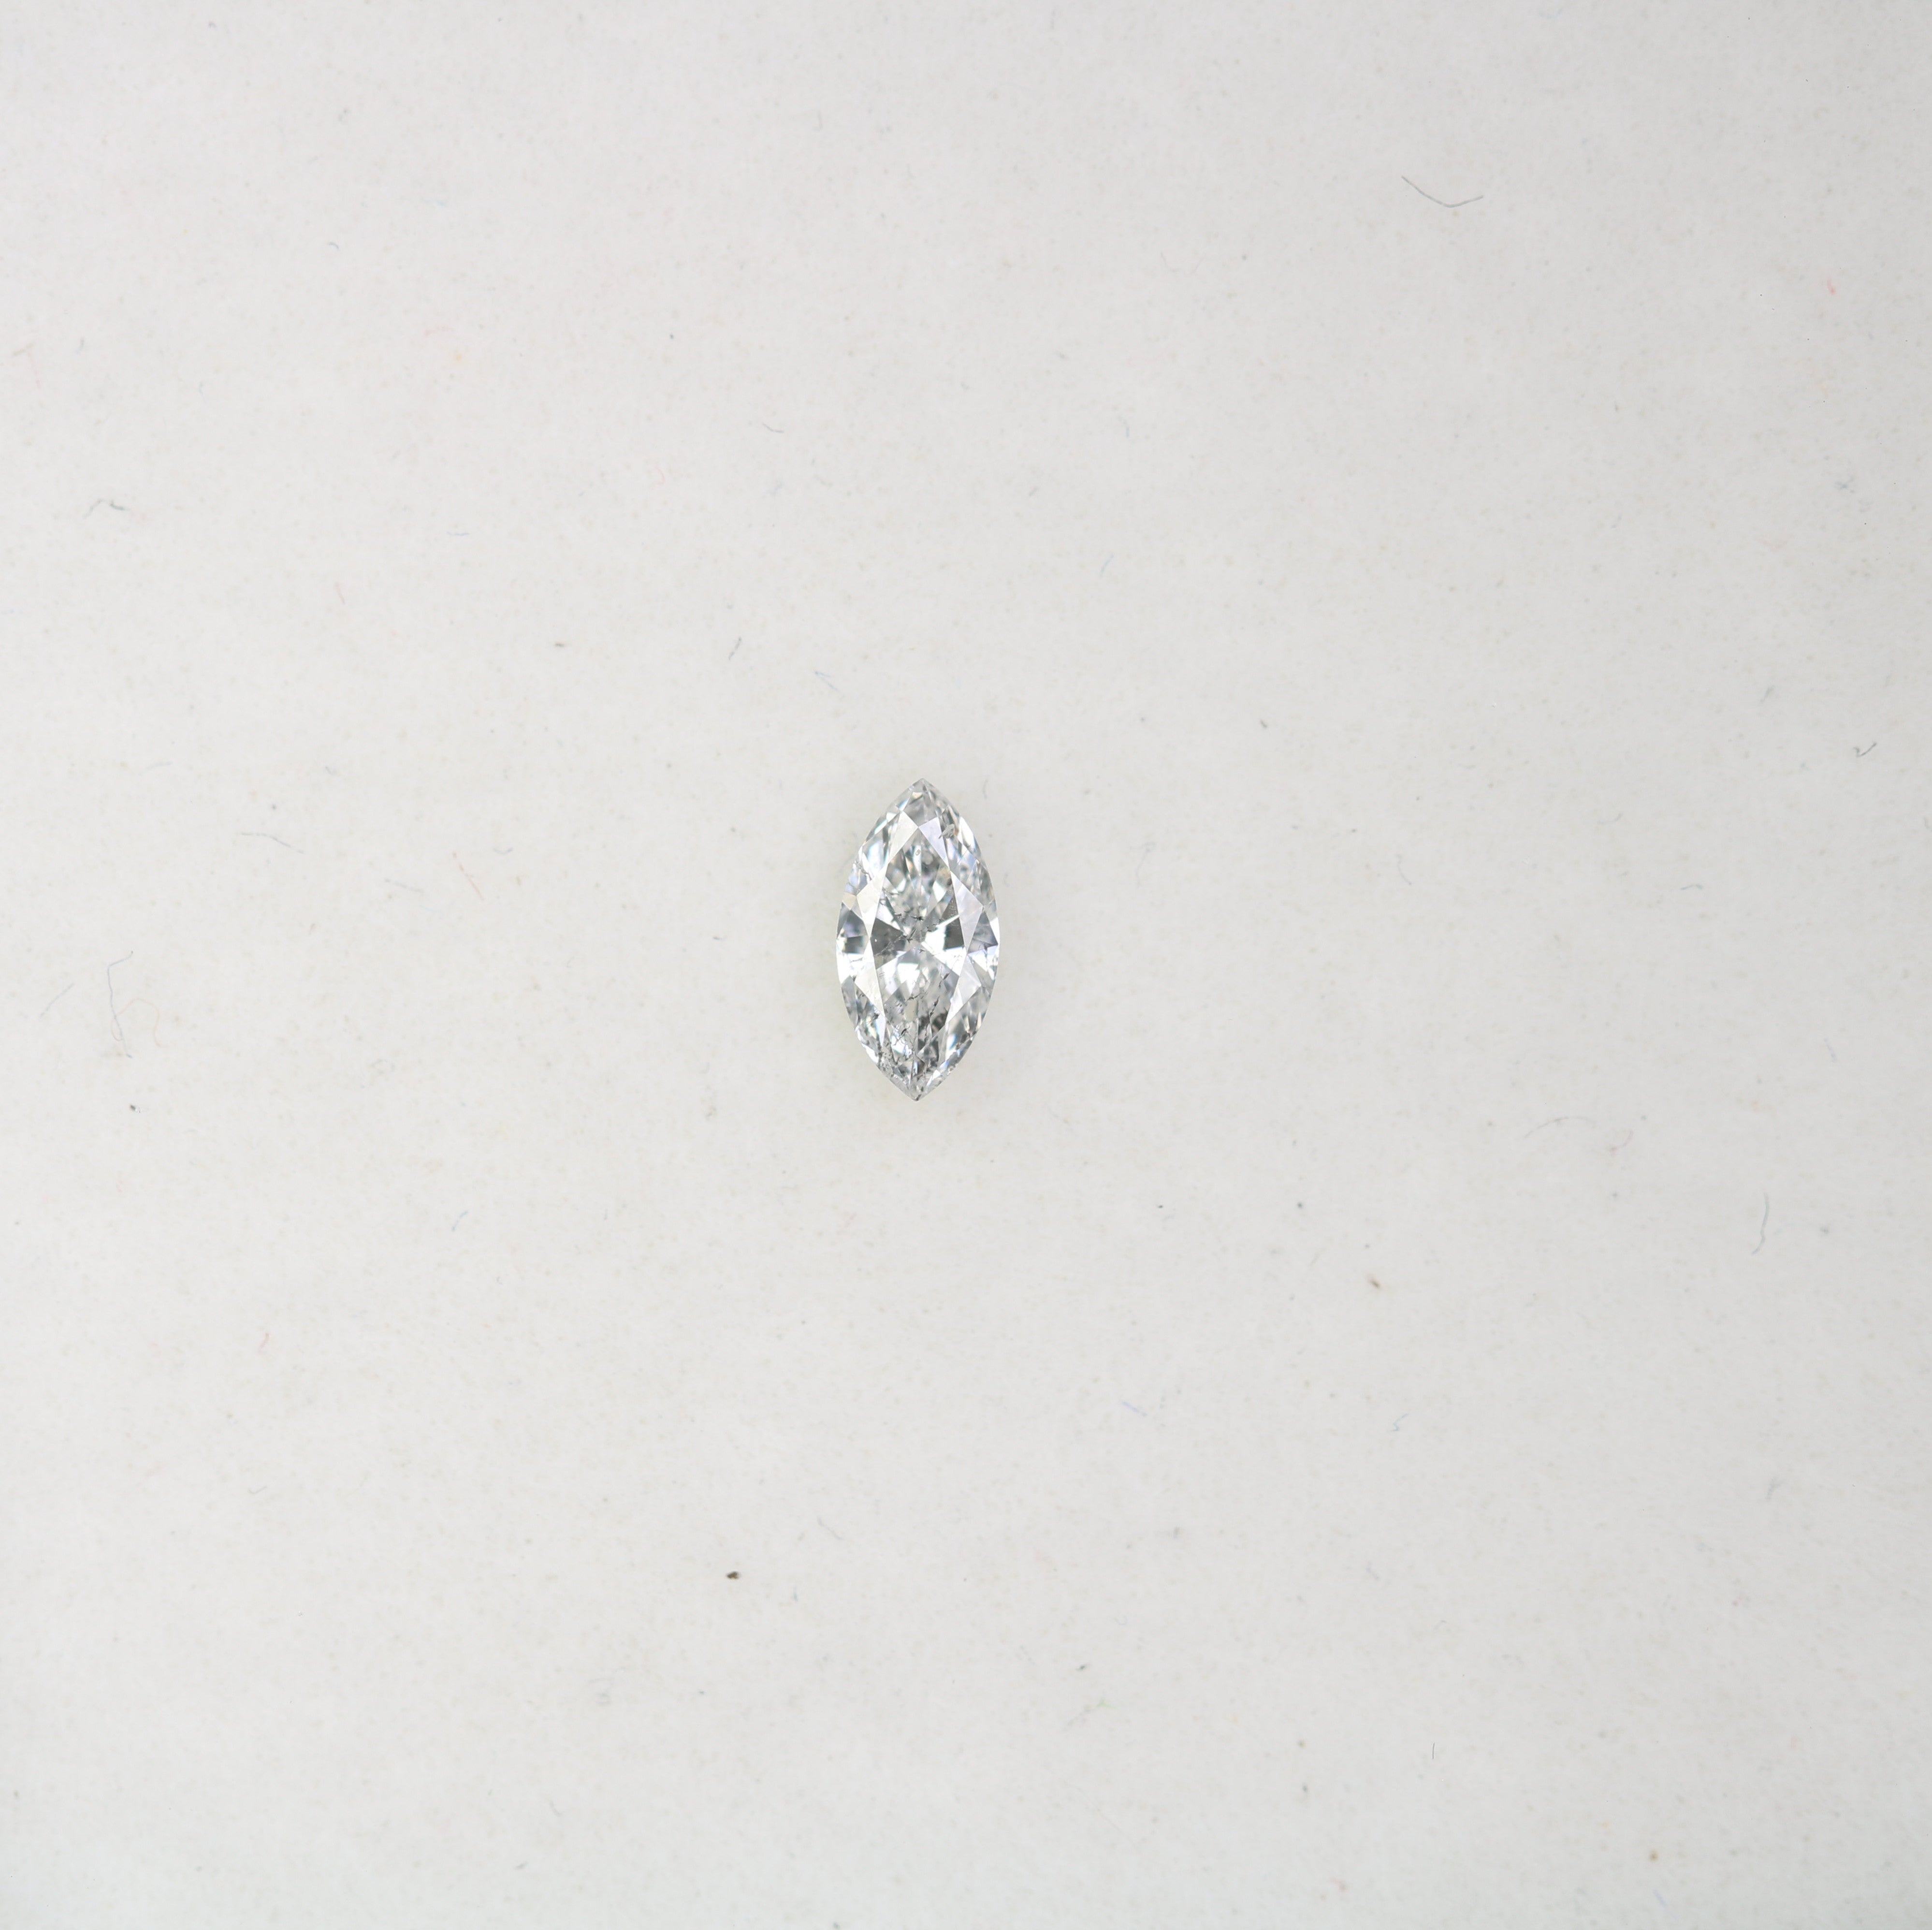 0.15 CT Salt And Pepper Marquise Cut Natural Diamond For Engagement Ring